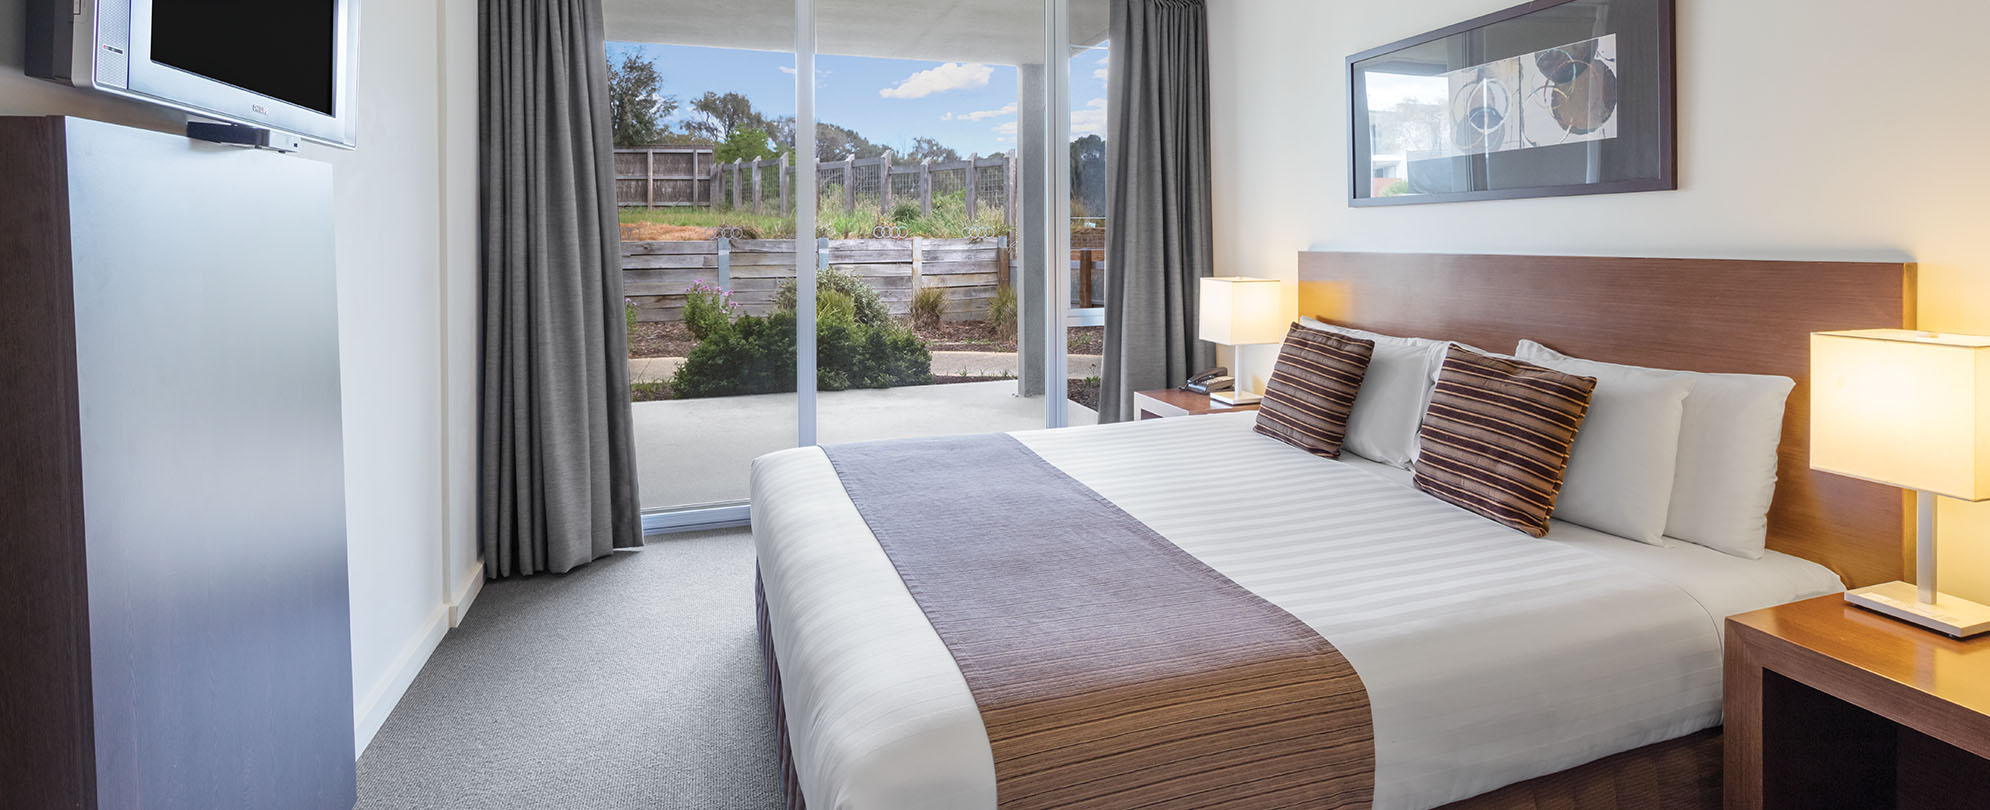 A king-sized bed, neatly made inside a 1-bedroom suite at Club Wyndham Torquay.